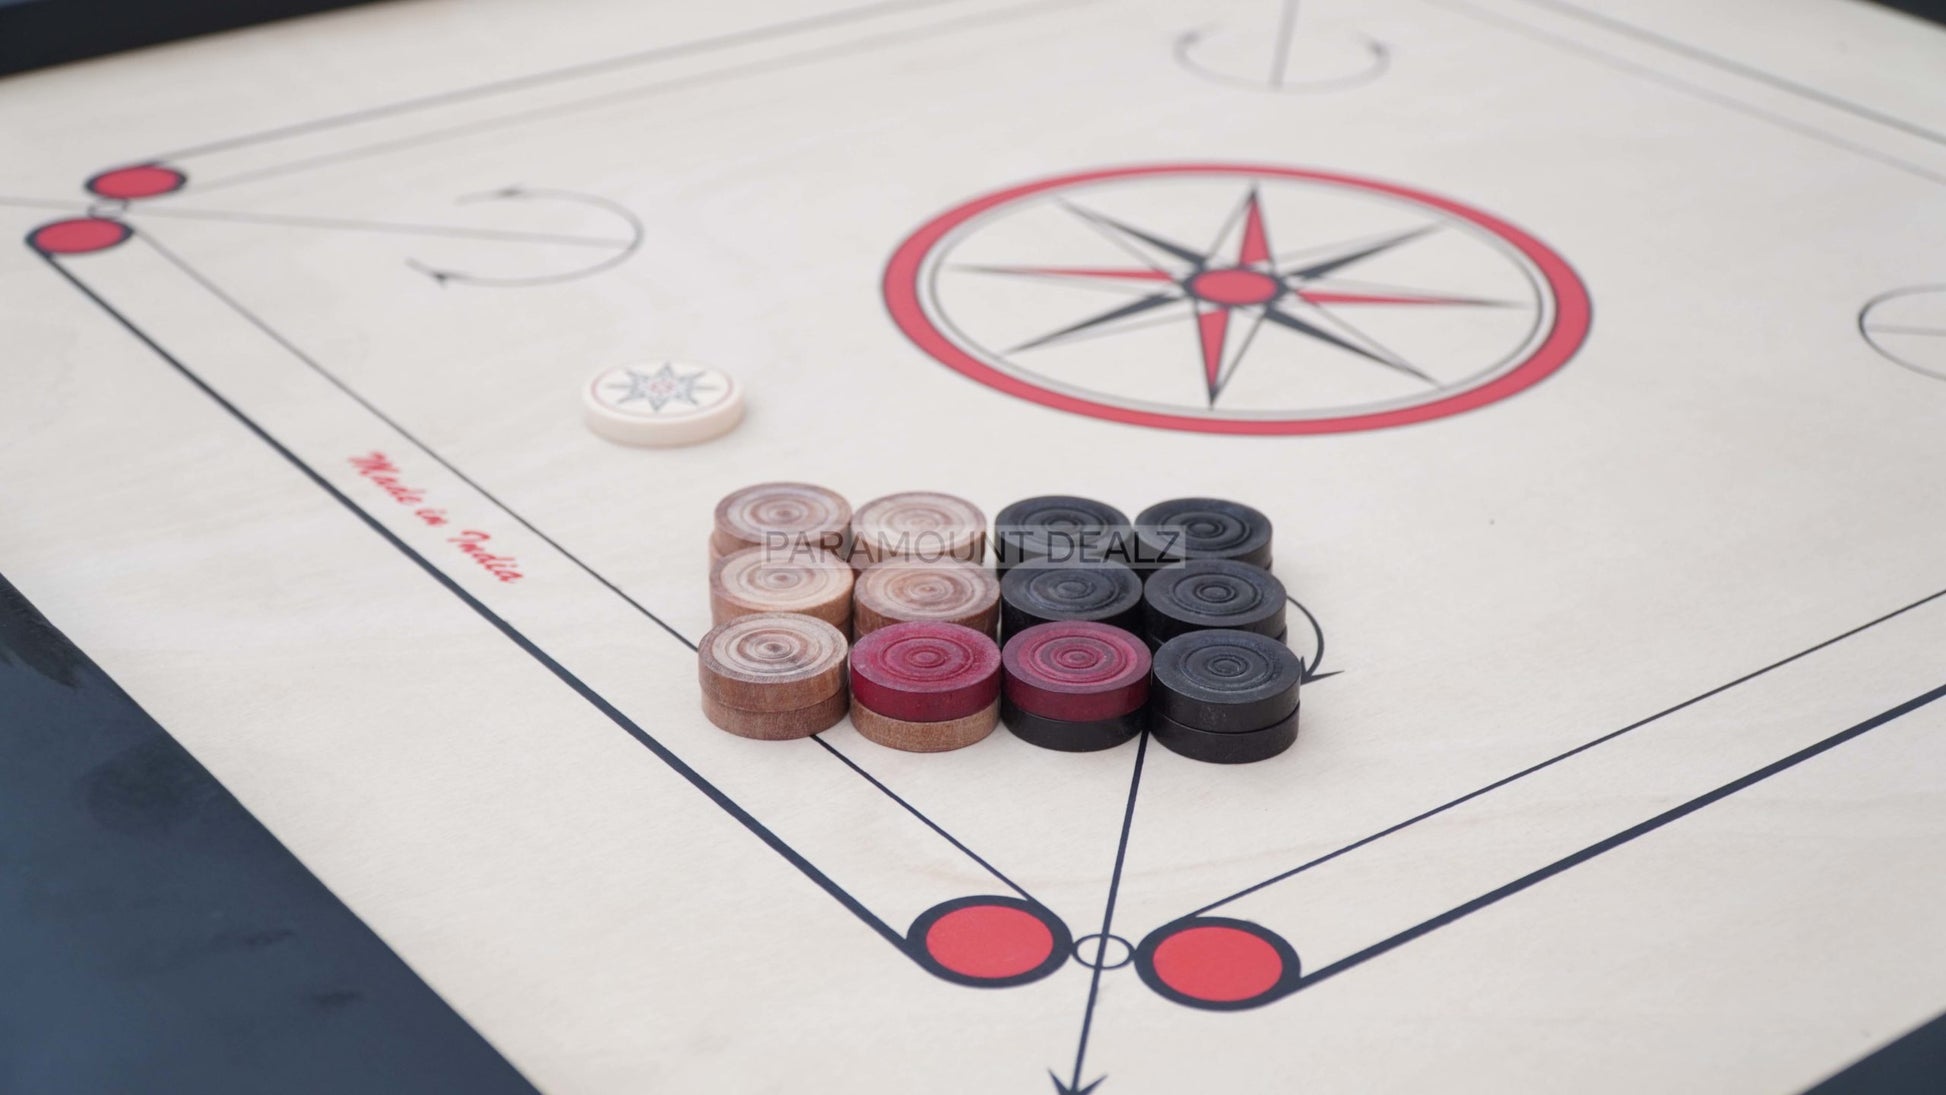 THOR SERIES PROFESSIONAL CARROM BOARD WITH CARROM COINS